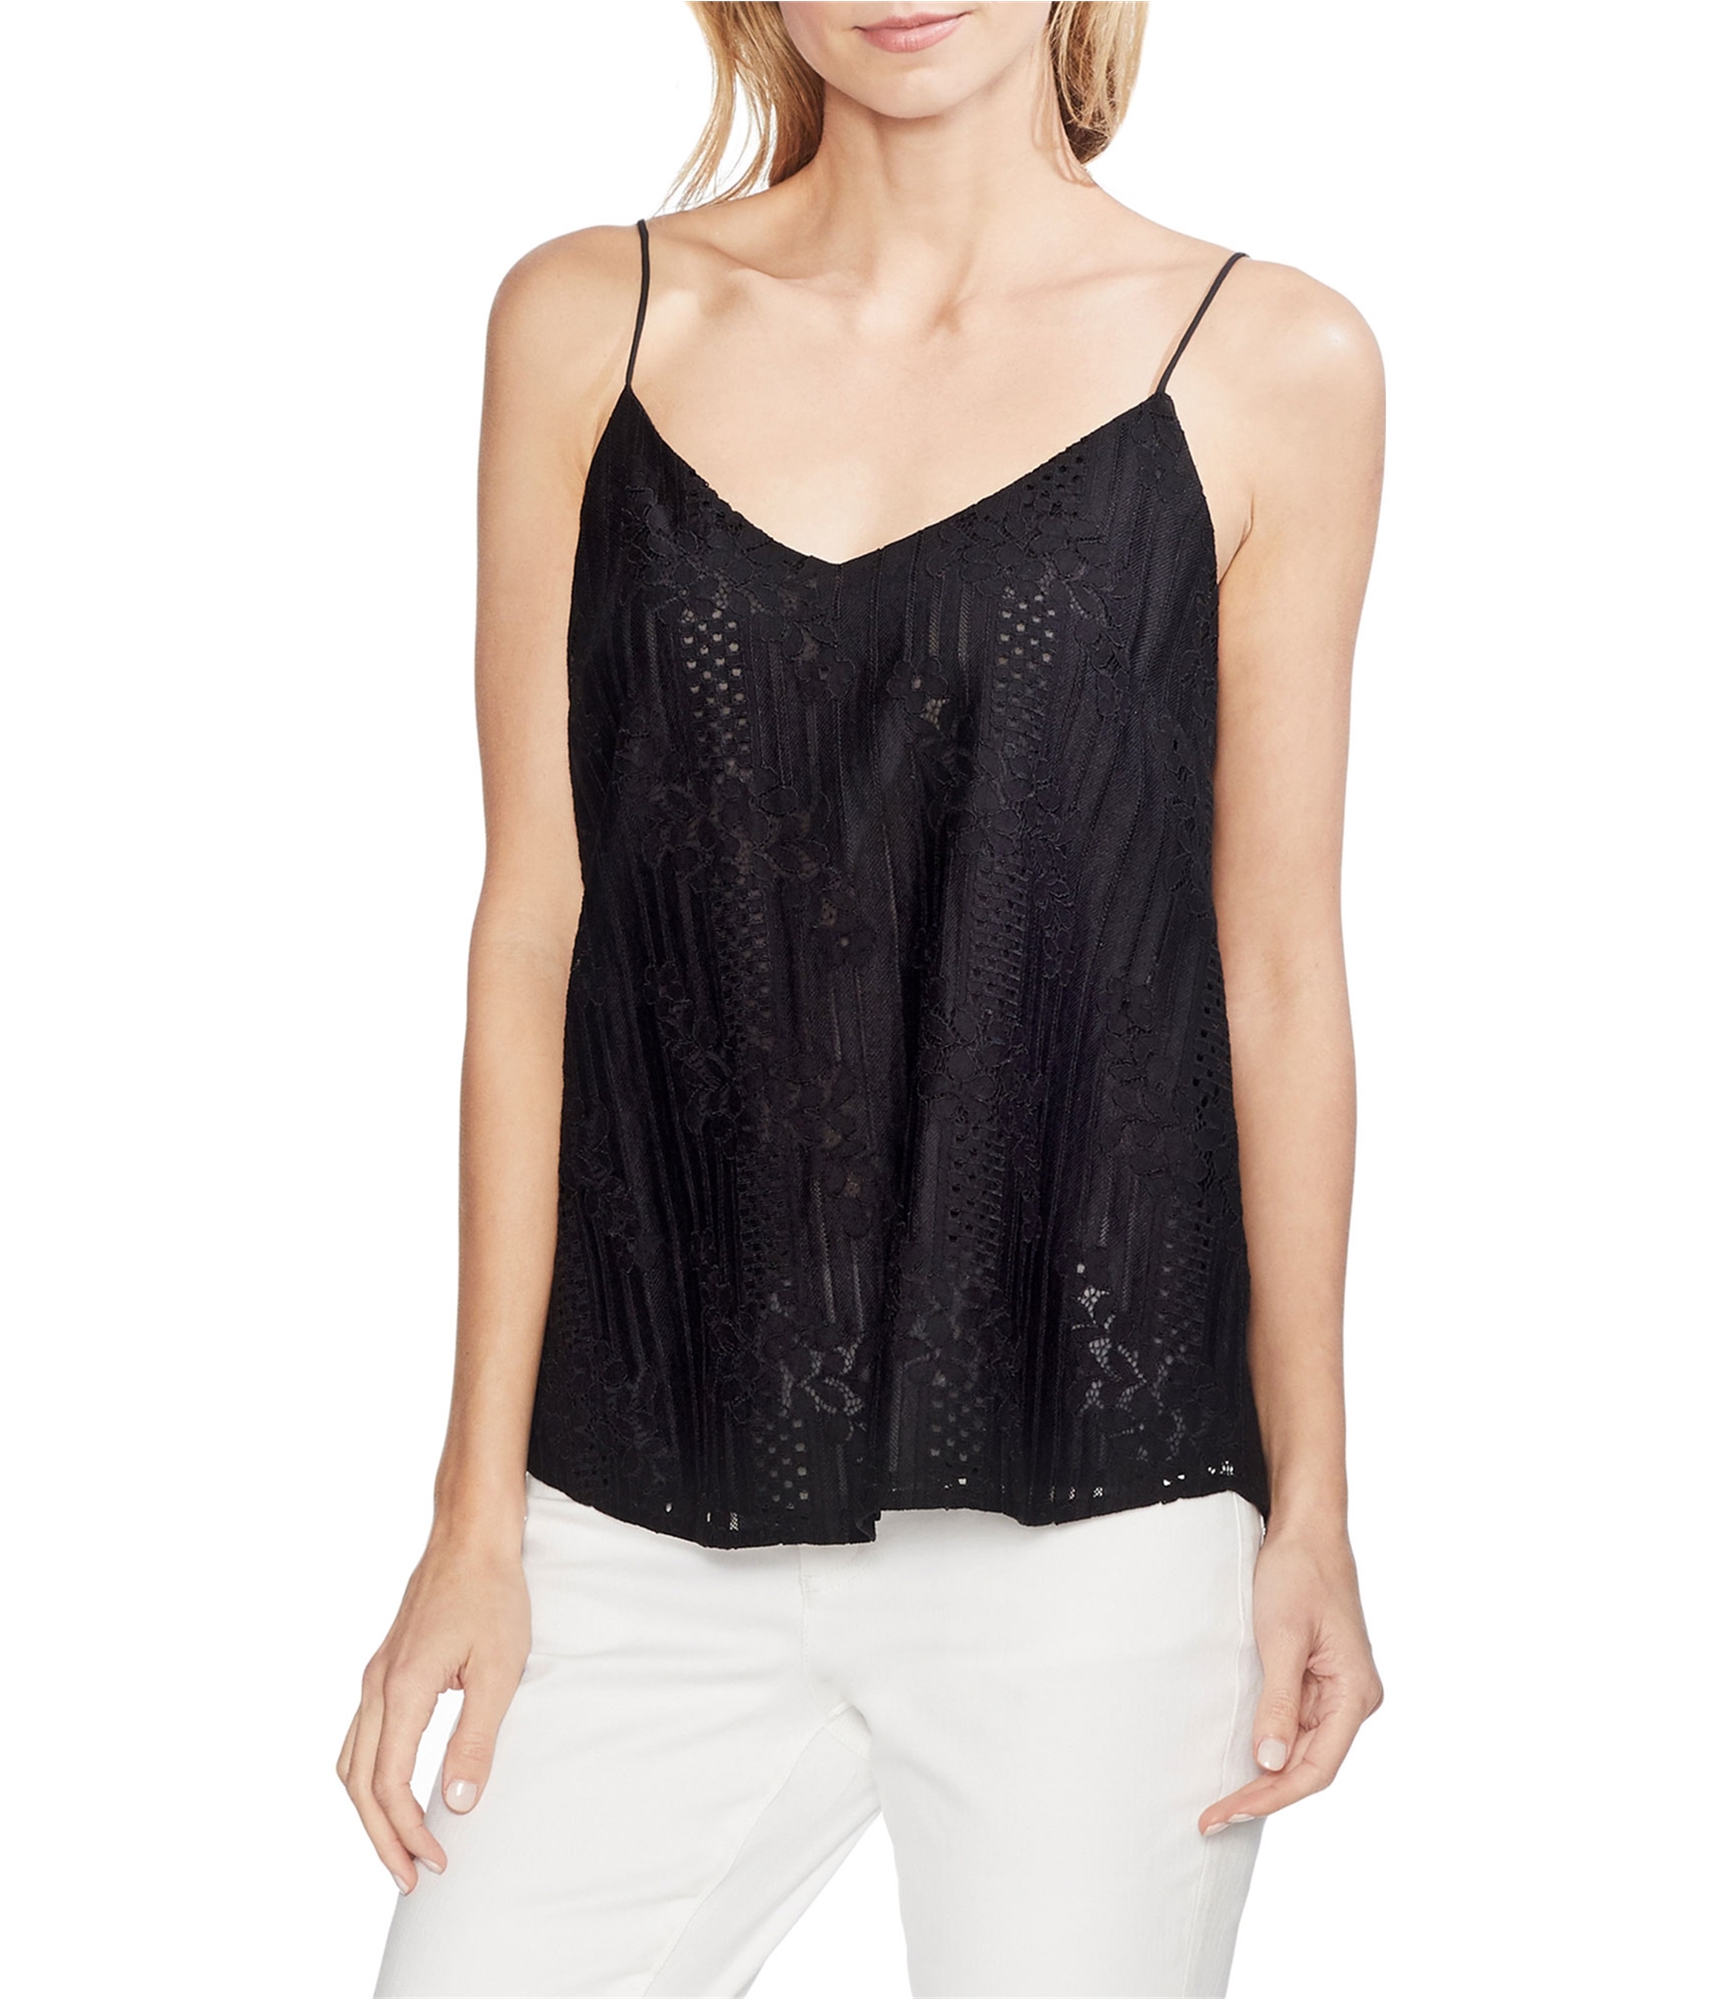 Vince Camuto Womens Lace Overlay Cami Tank Top | eBay